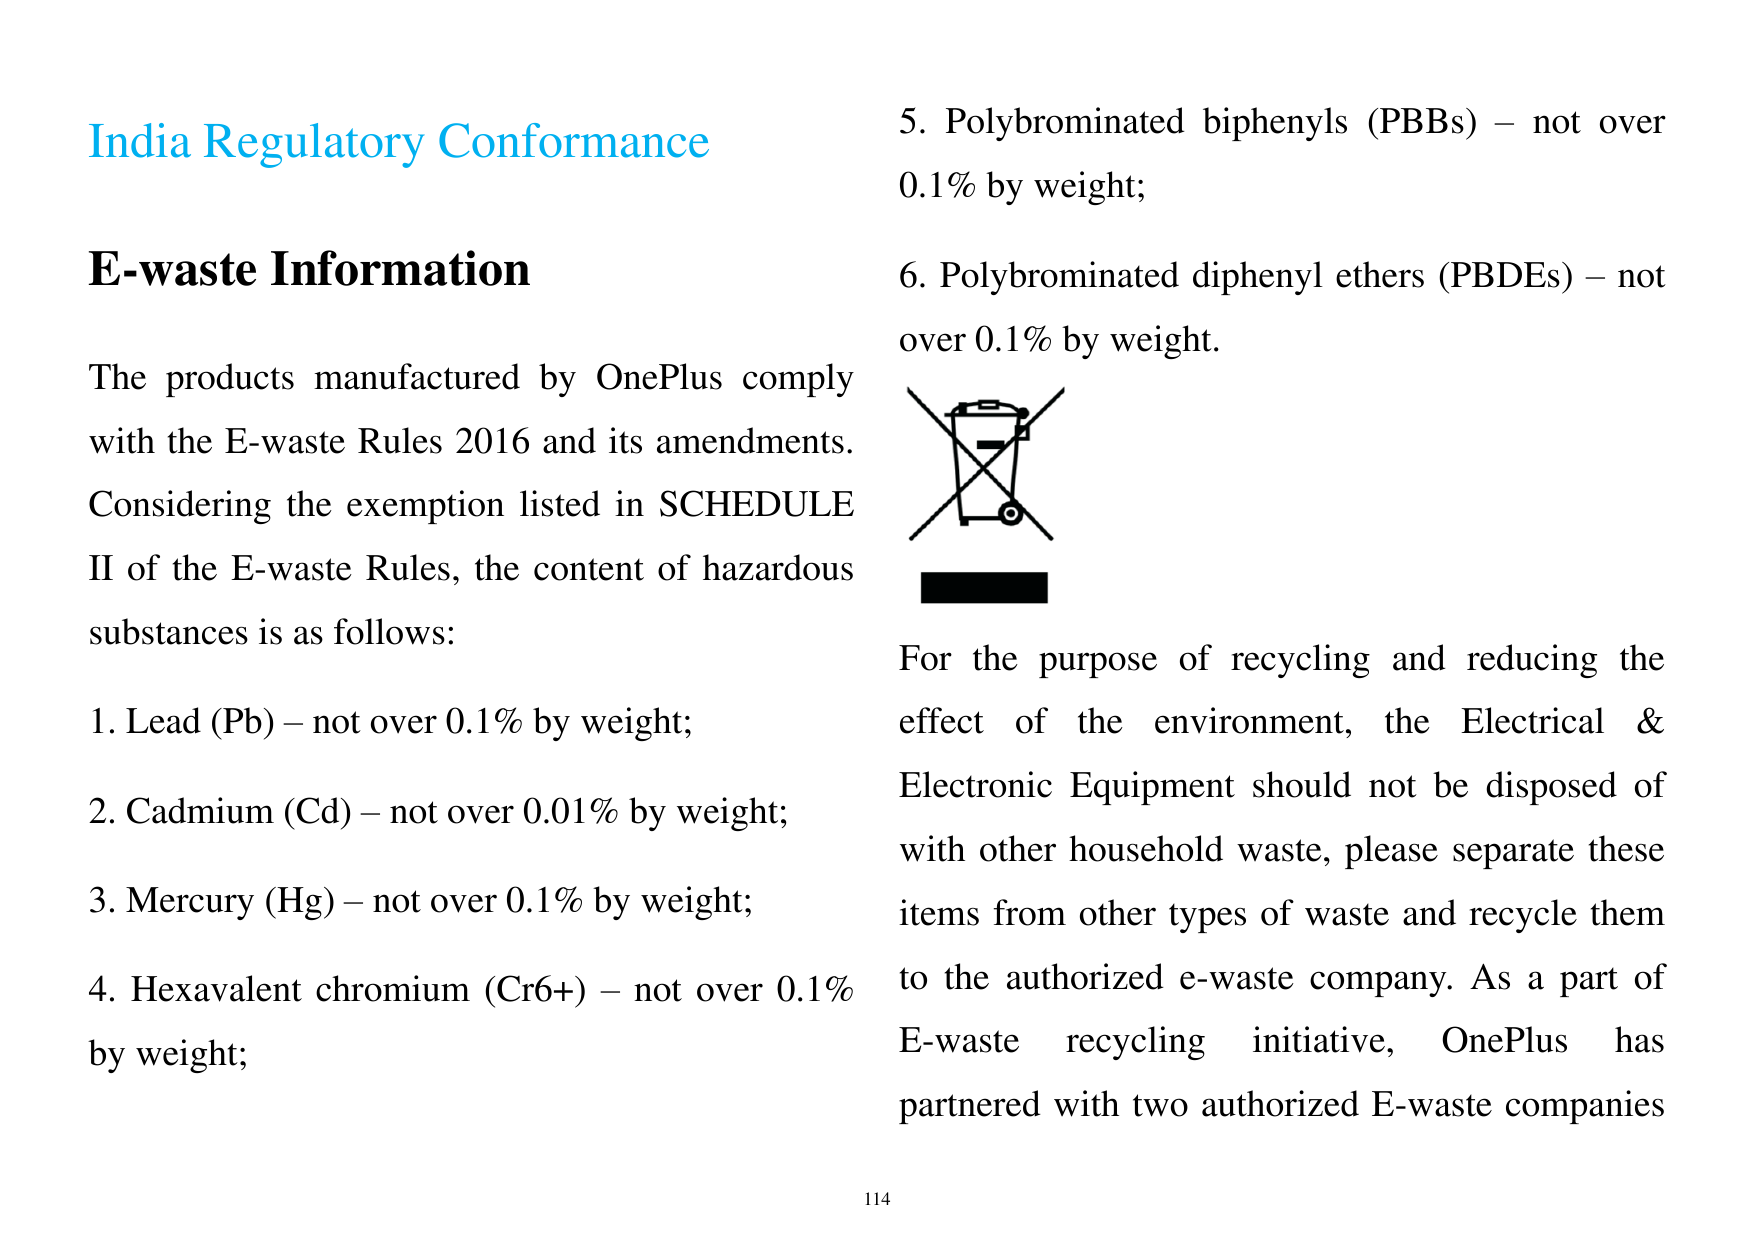 5. Polybrominated biphenyls (PBBs) – not overIndia Regulatory Conformance0.1% by weight;E-waste Information6. Polybrominated dip